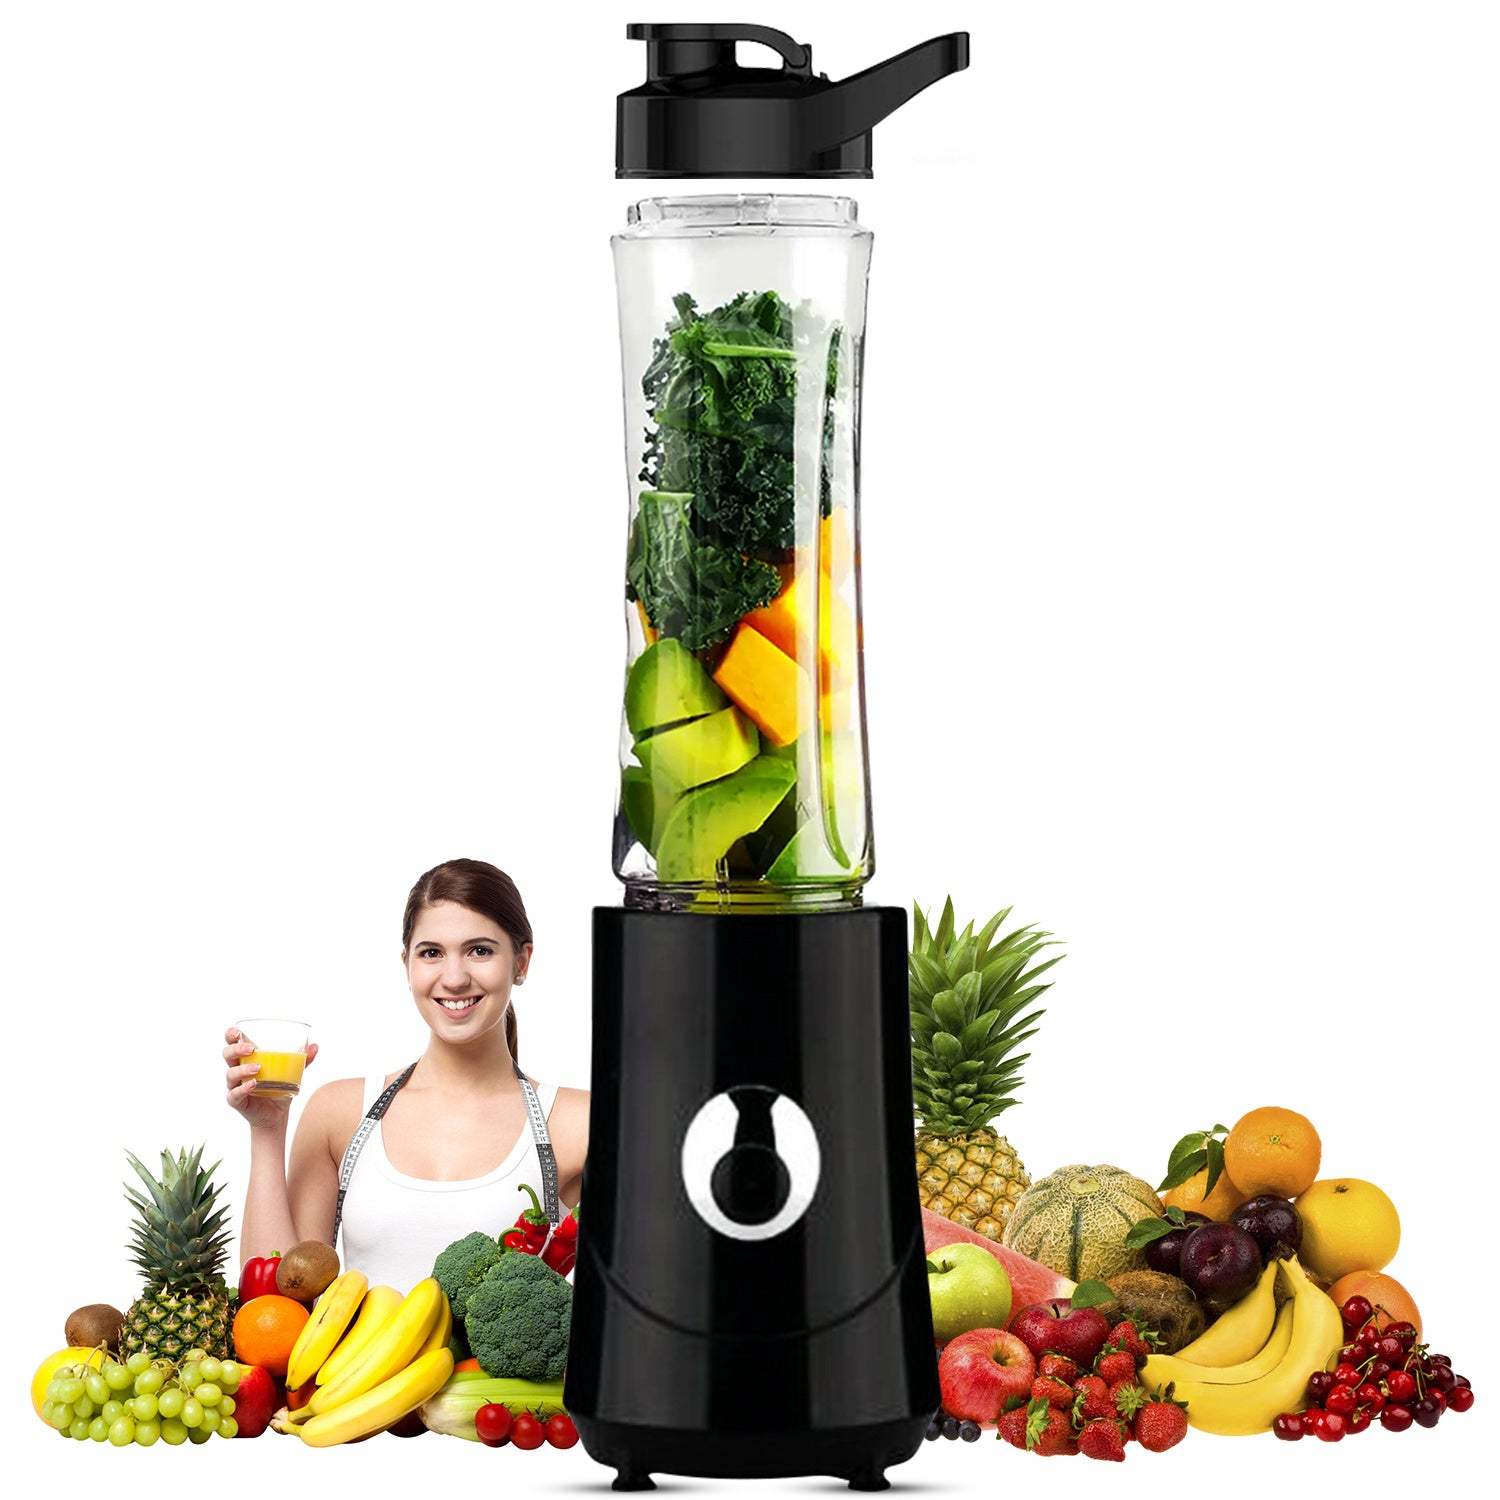 A woman is standing in front of a 5 Core 500ml Personal Blender and Nutrient Extractor For Juicer; Shakes and Smoothies; 160W licuadora portátil filled with fruits and vegetables.